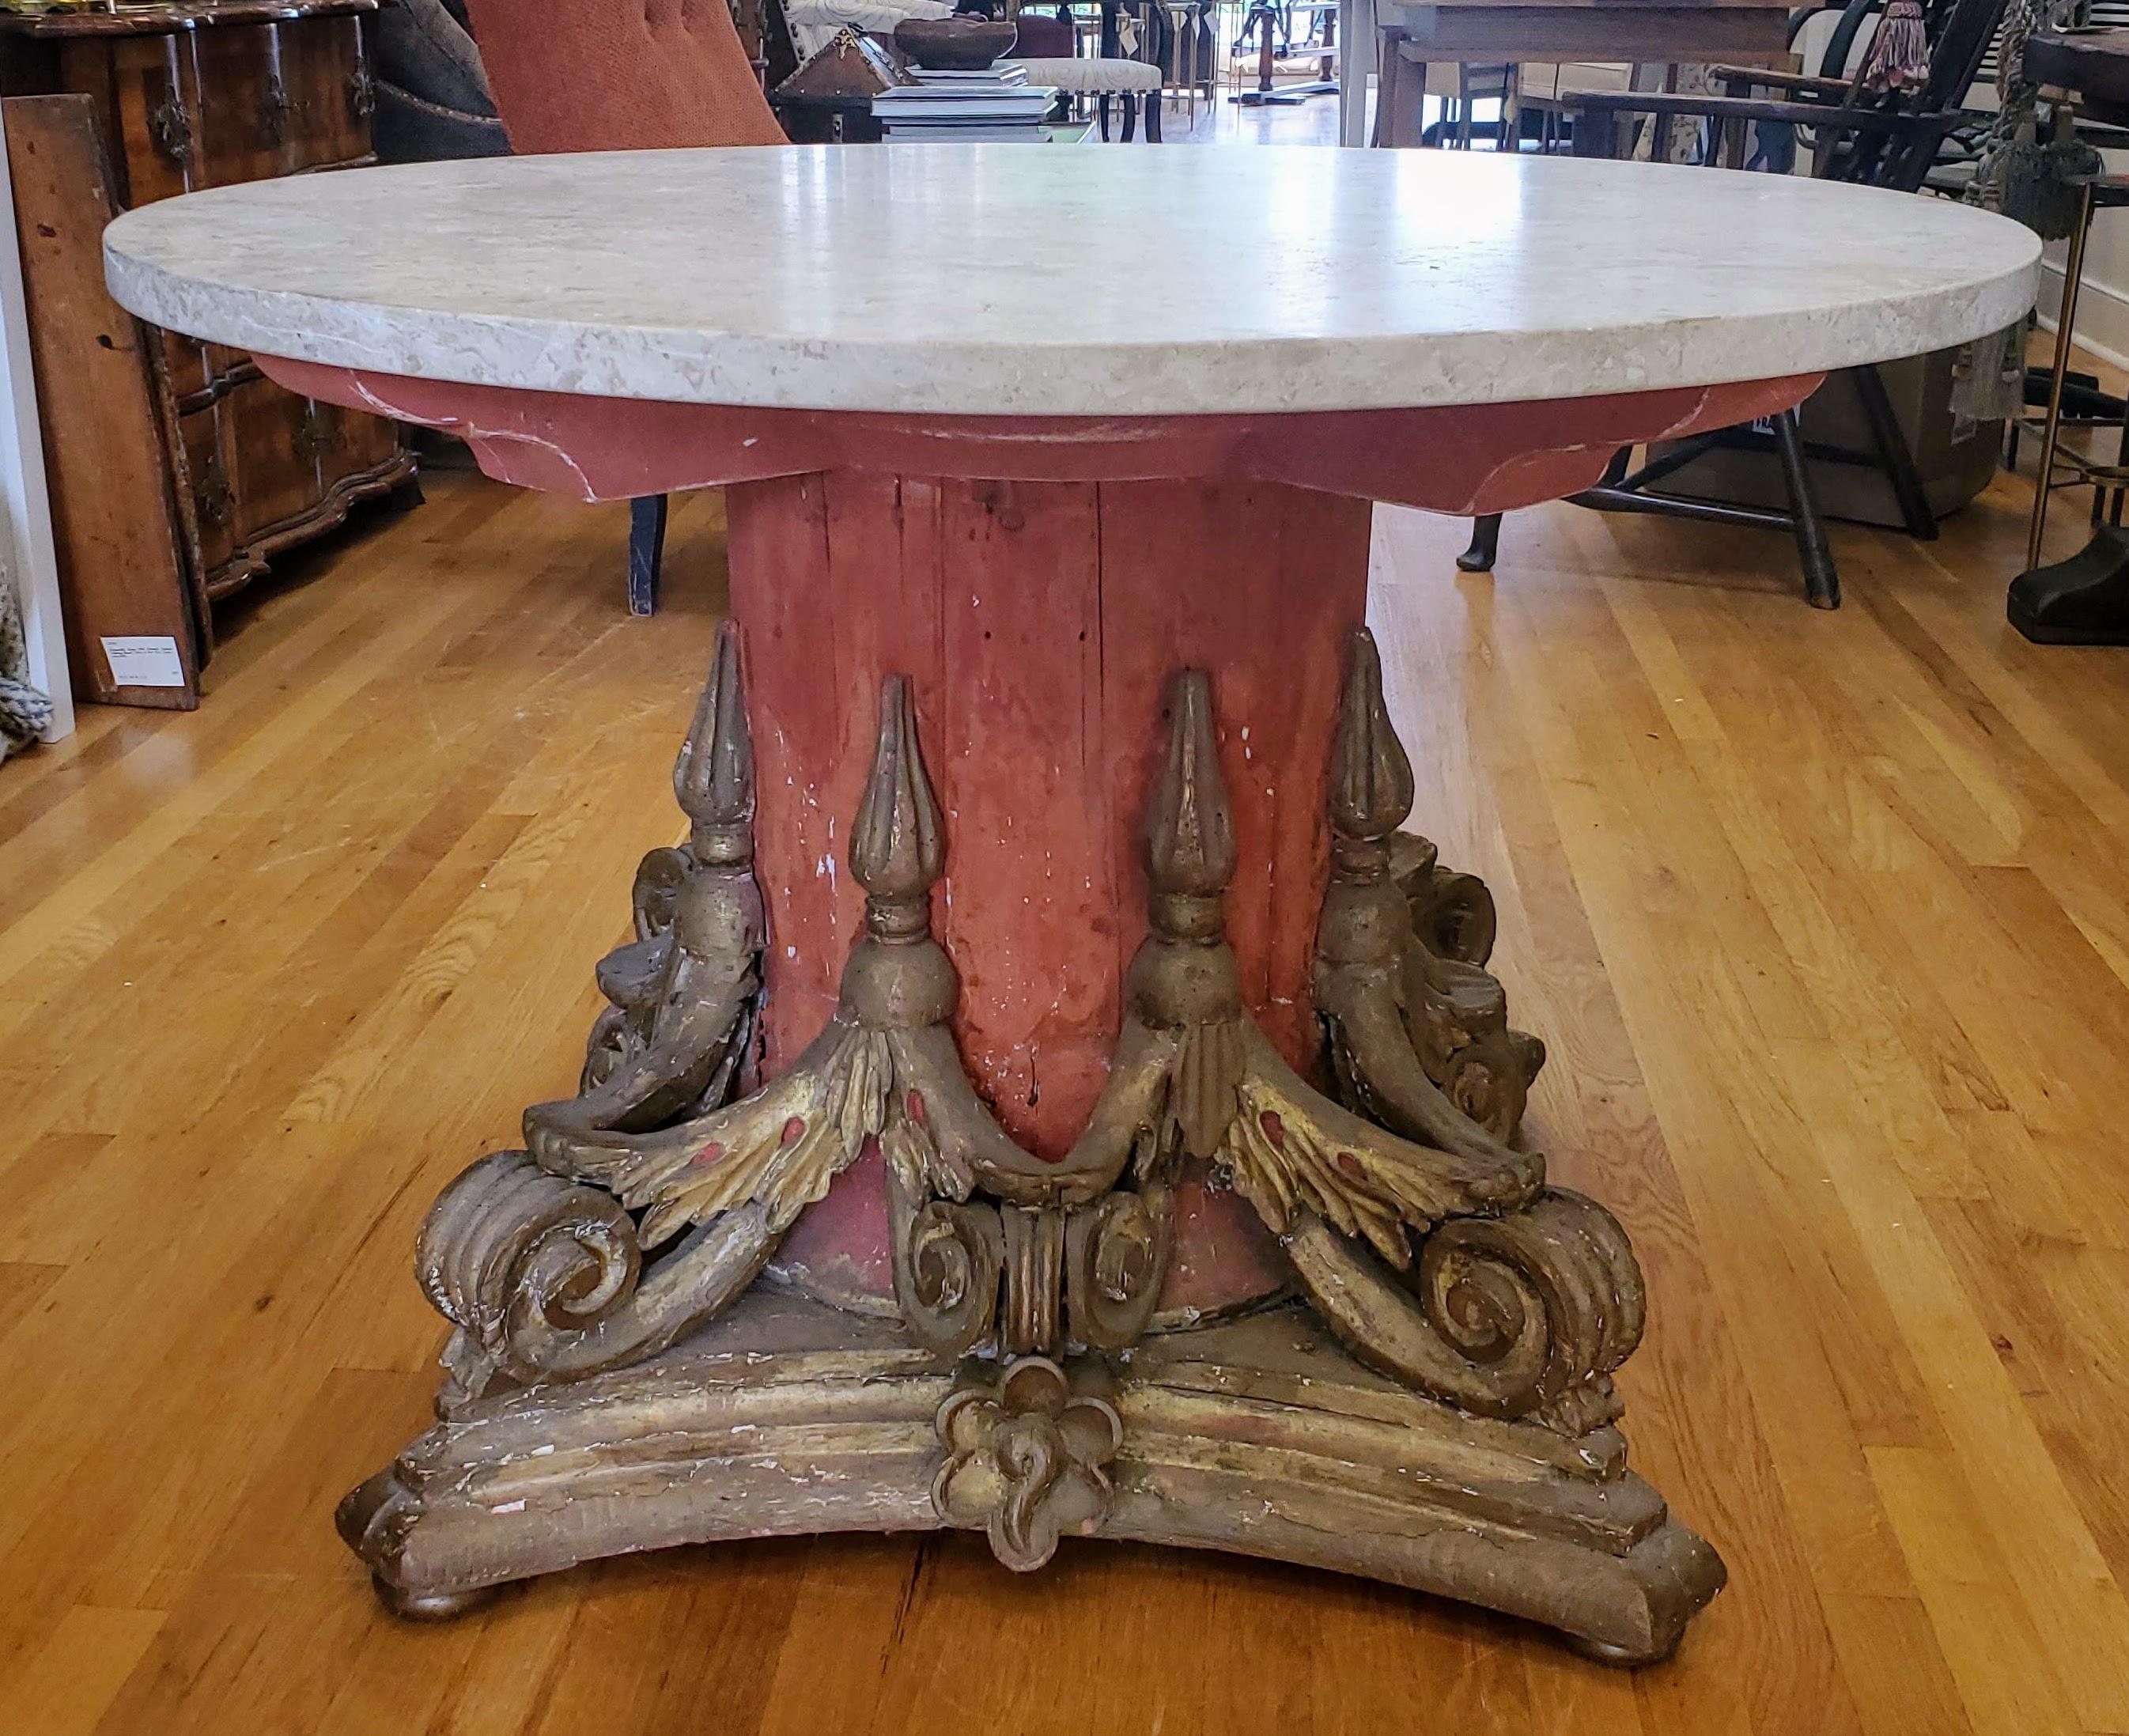 This beautiful 18th century Venetian architectural carved and painted capital table with round fossilized marble top is sure to be a conversation piece in your home. Large but not obtrusive, this table makes a statement.
Venice, circa